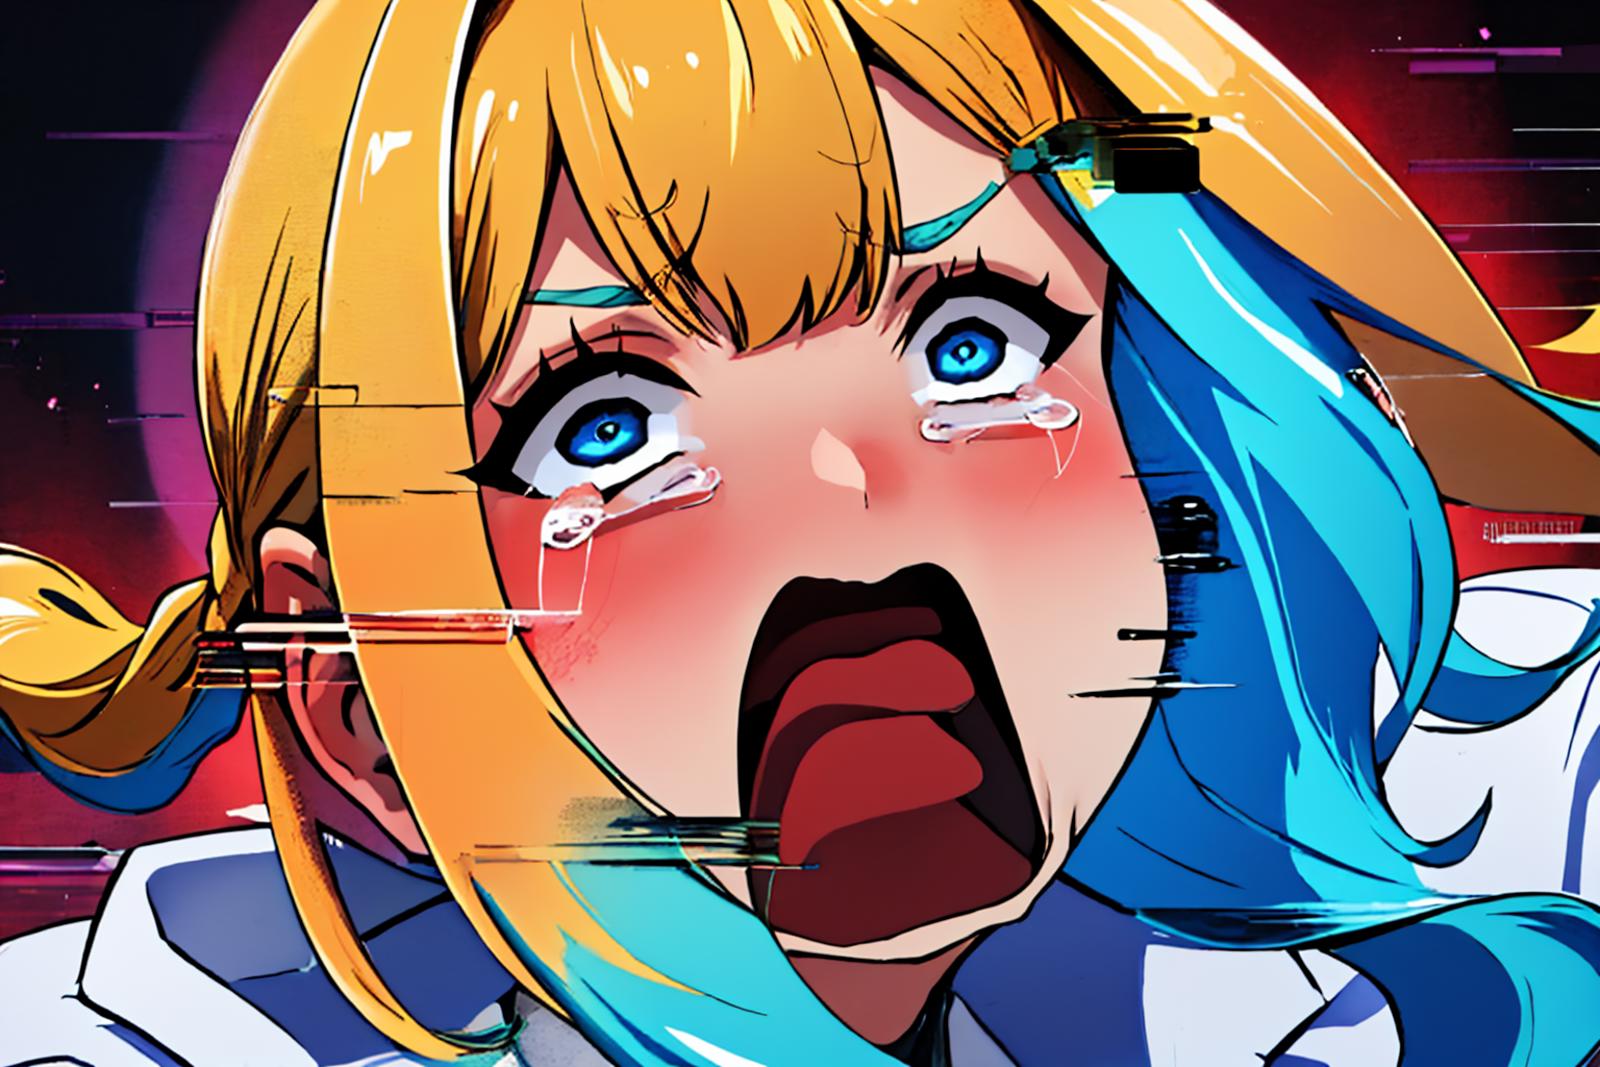 A cartoon depiction of a woman with blue eyes, a yellow head, and a blue streak in her hair, crying with her mouth open.